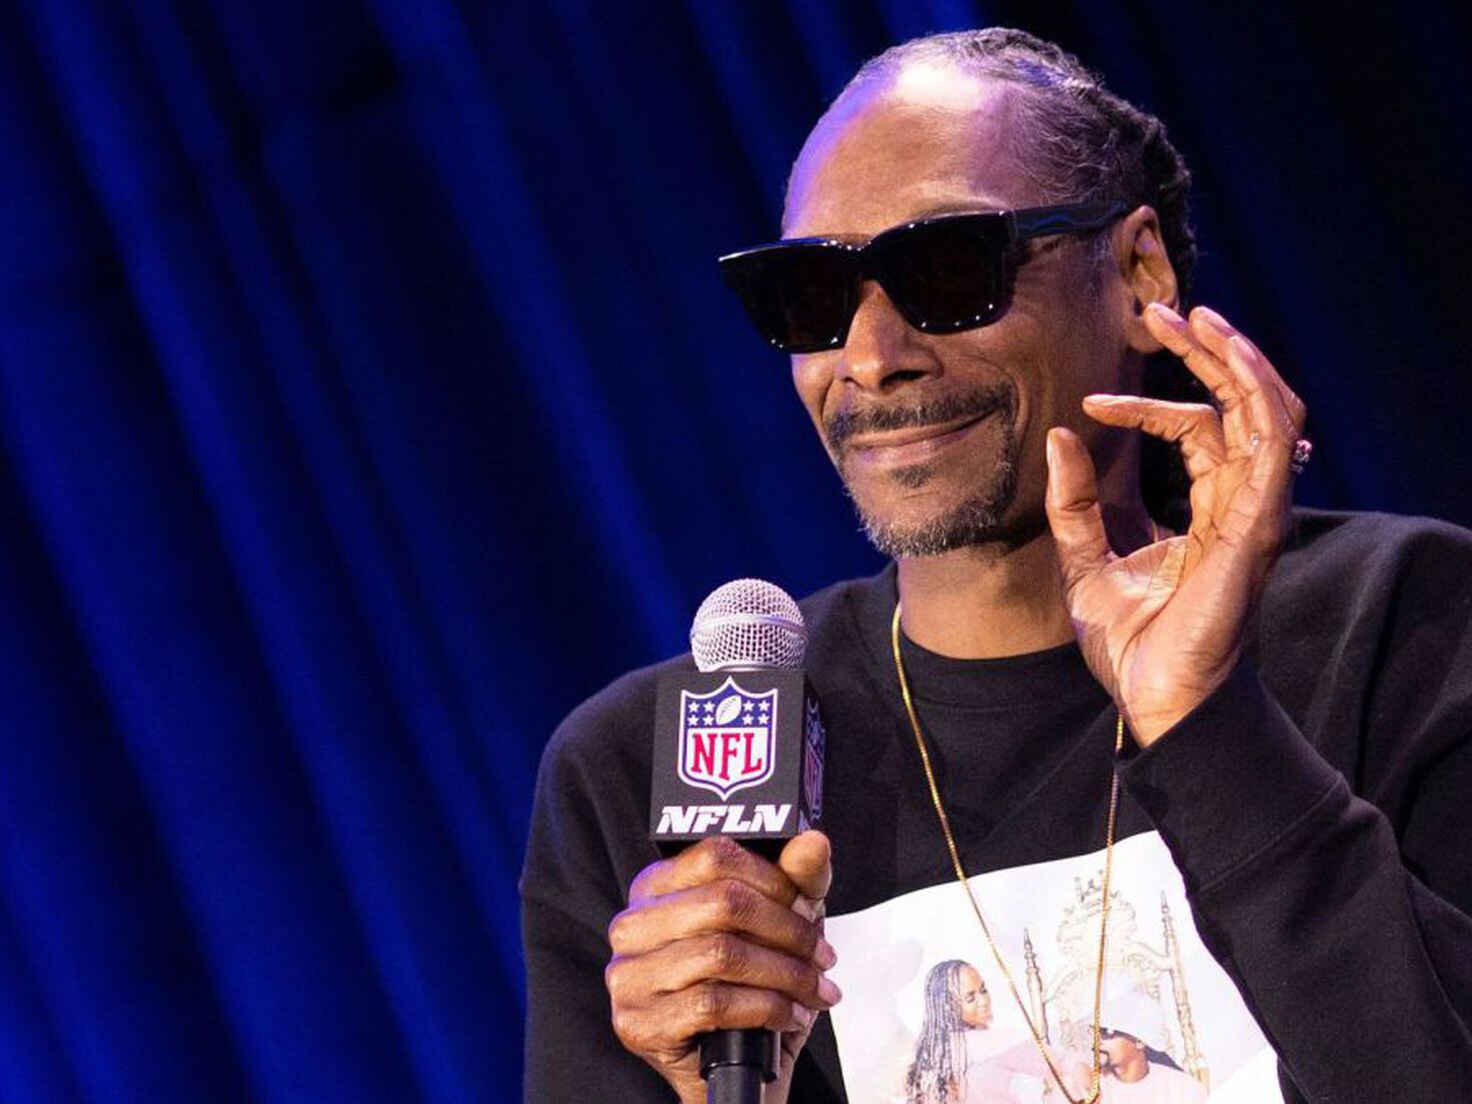 Snoop Dogg reveals truth about giving up “smoke” - AS USA